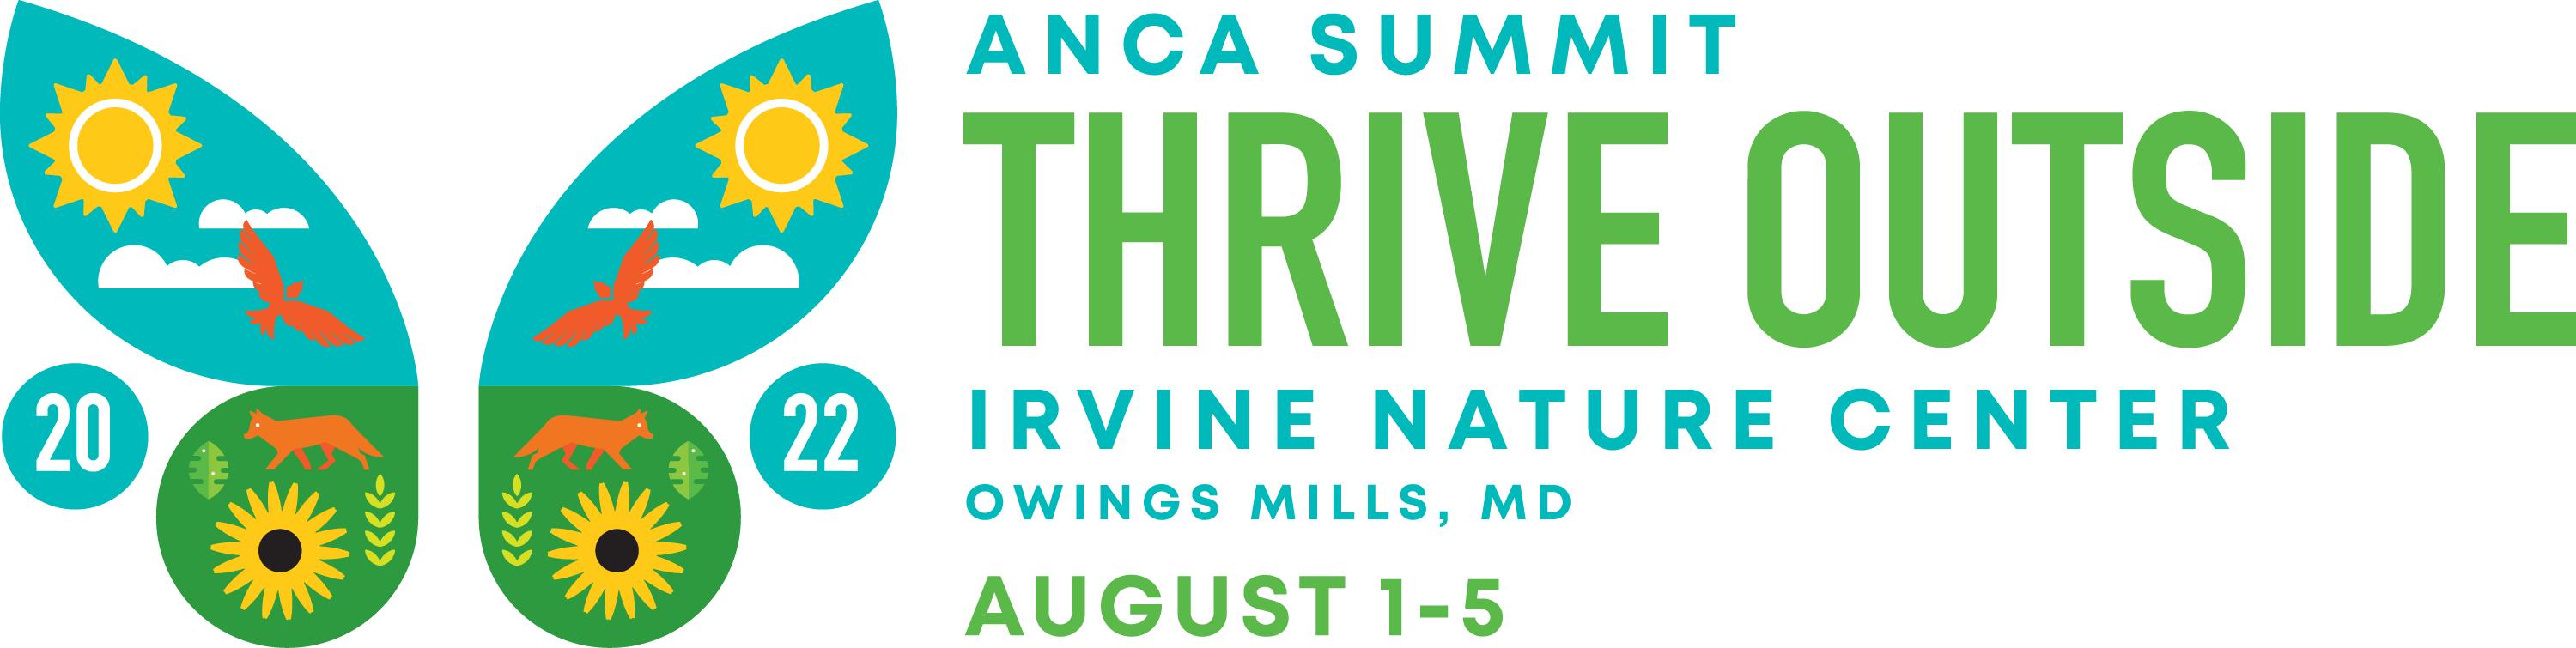 ANCA Summit: Thrive Outside | Irvine Nature Center | Owings Mills, Md | August 1-5